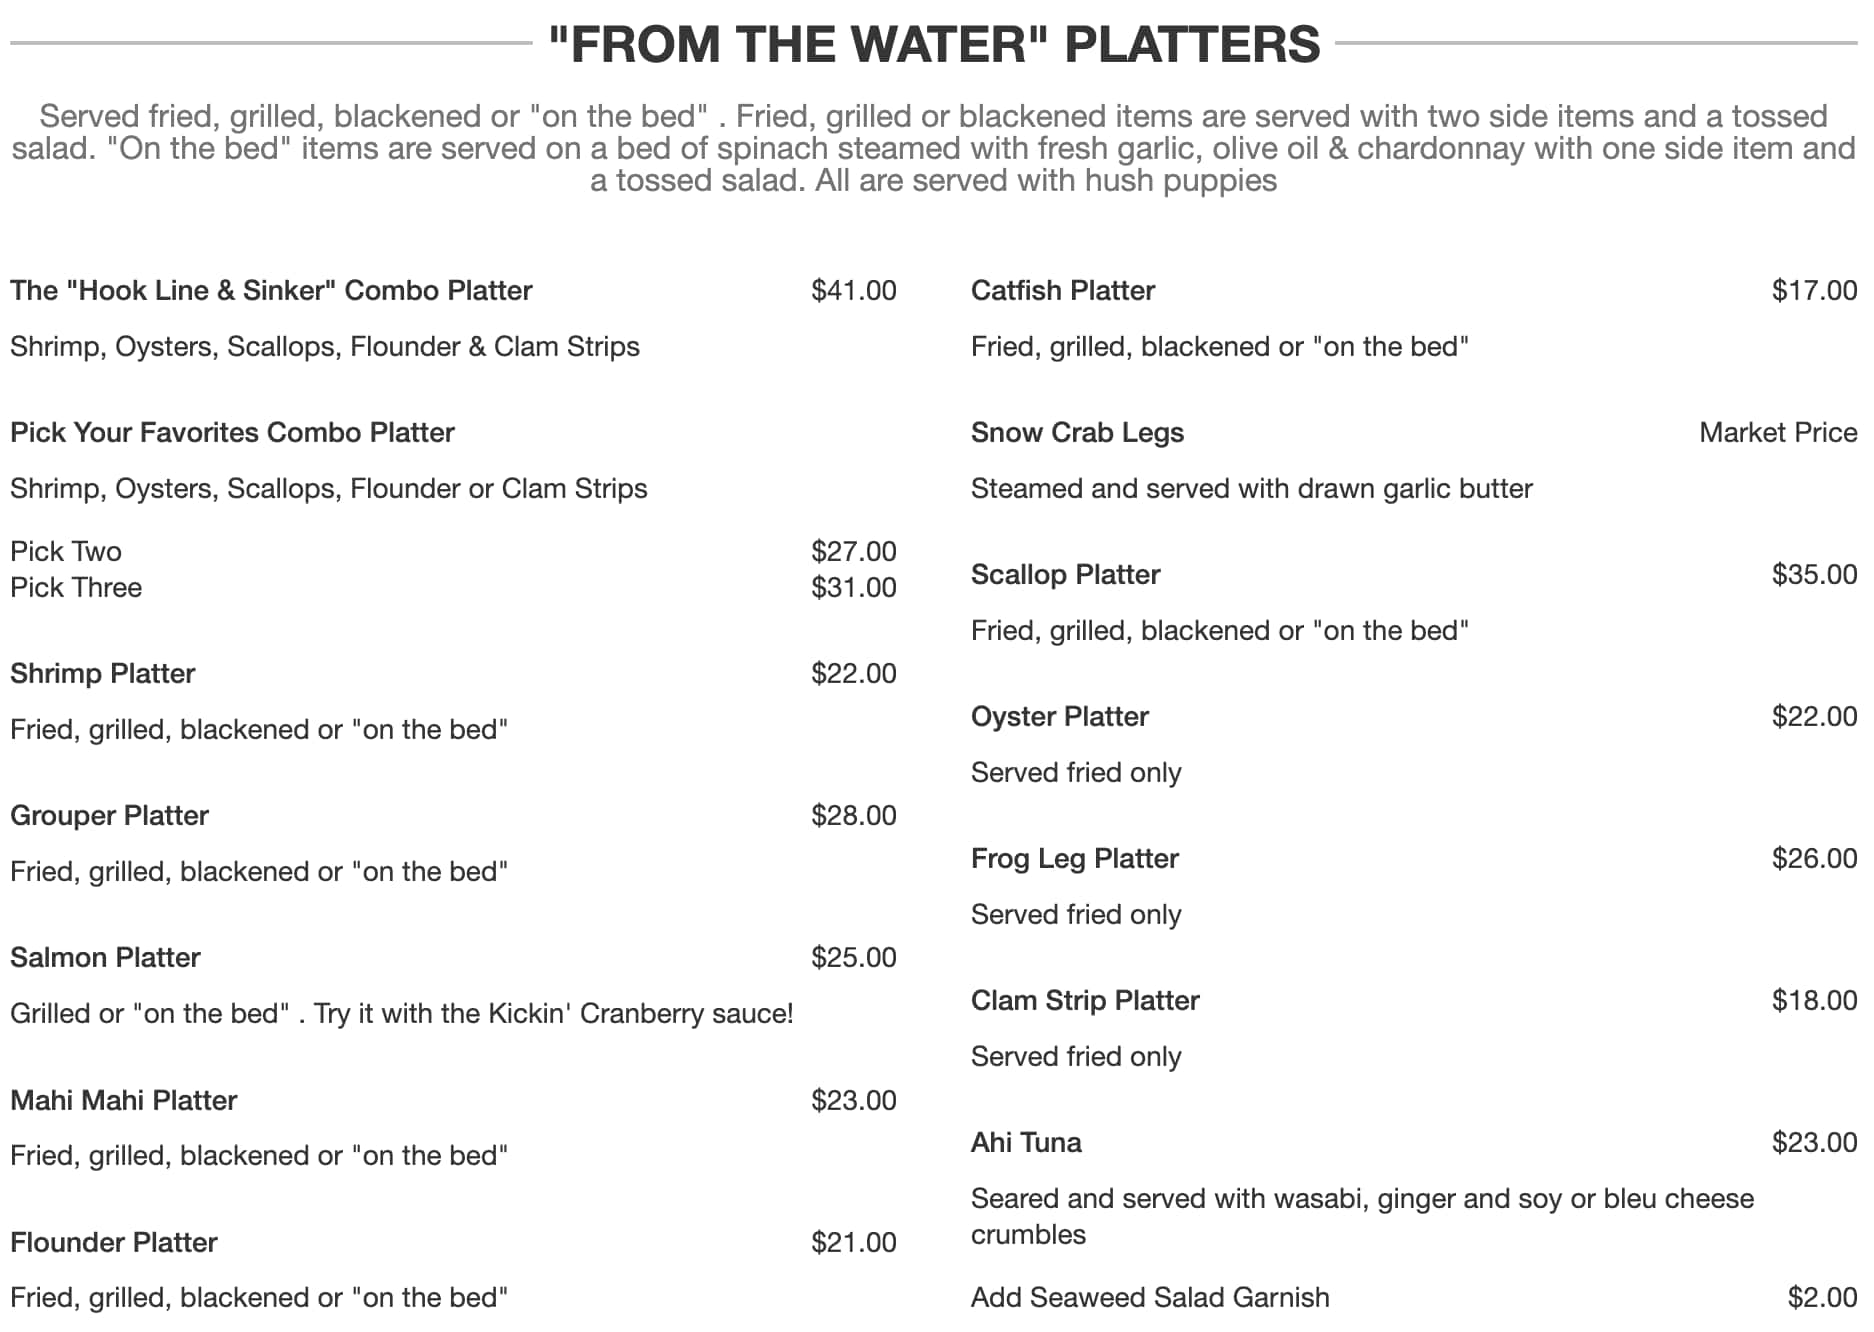 The Crooked Bass Grill and Tavern From The Water Platters Menu